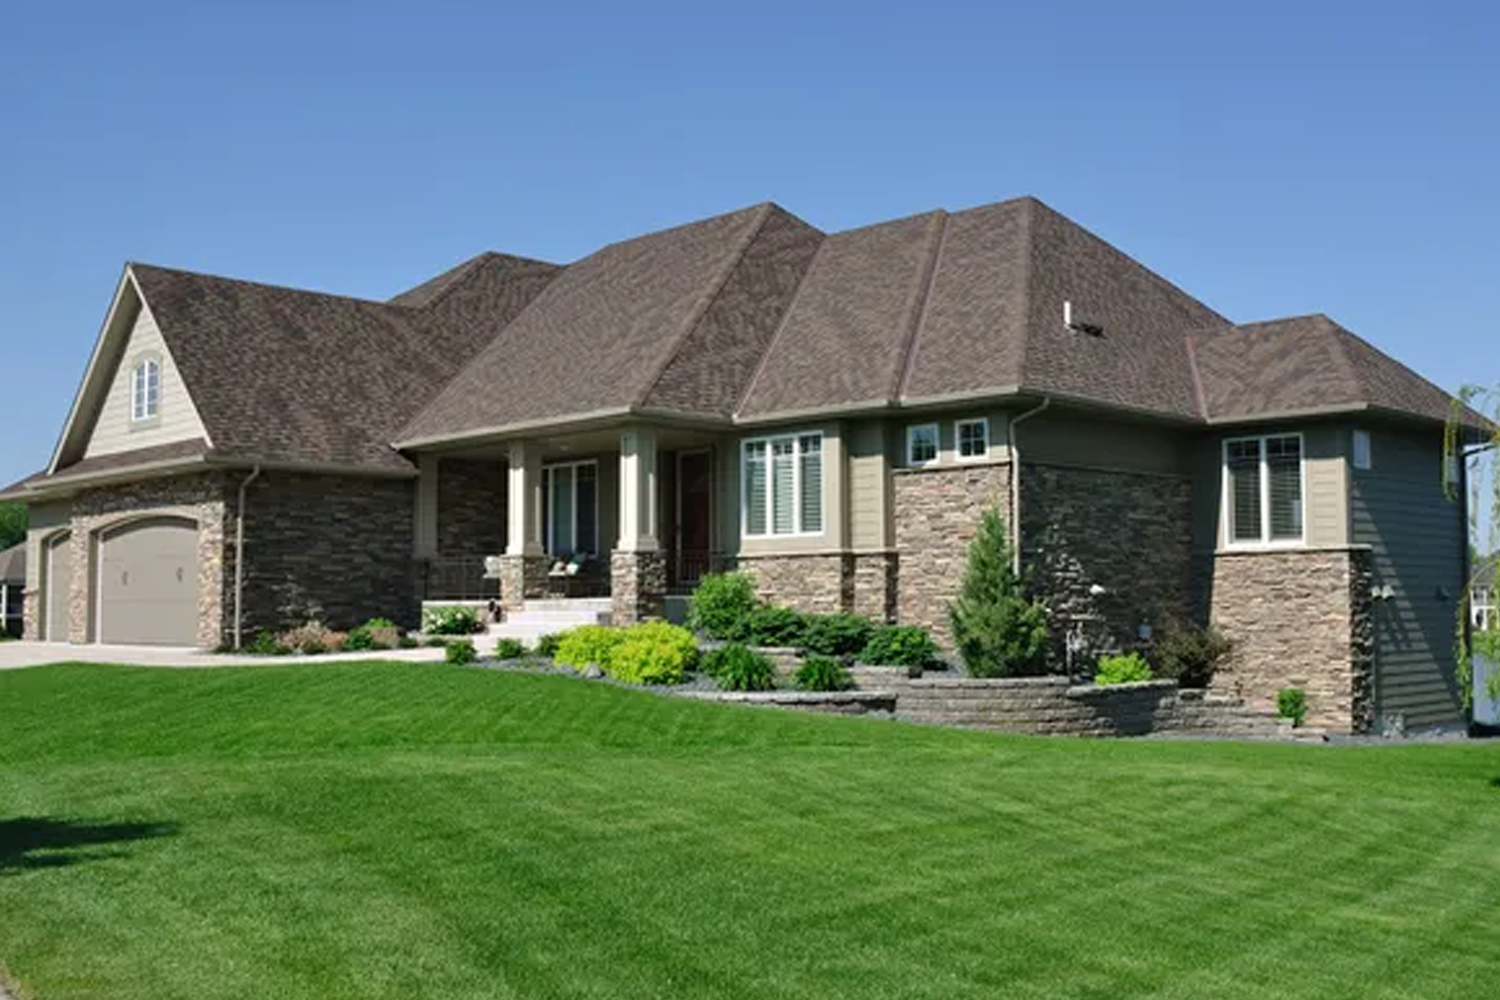 Makin Roofing: Your Trusted Roofing Experts in Ridgecrest, California